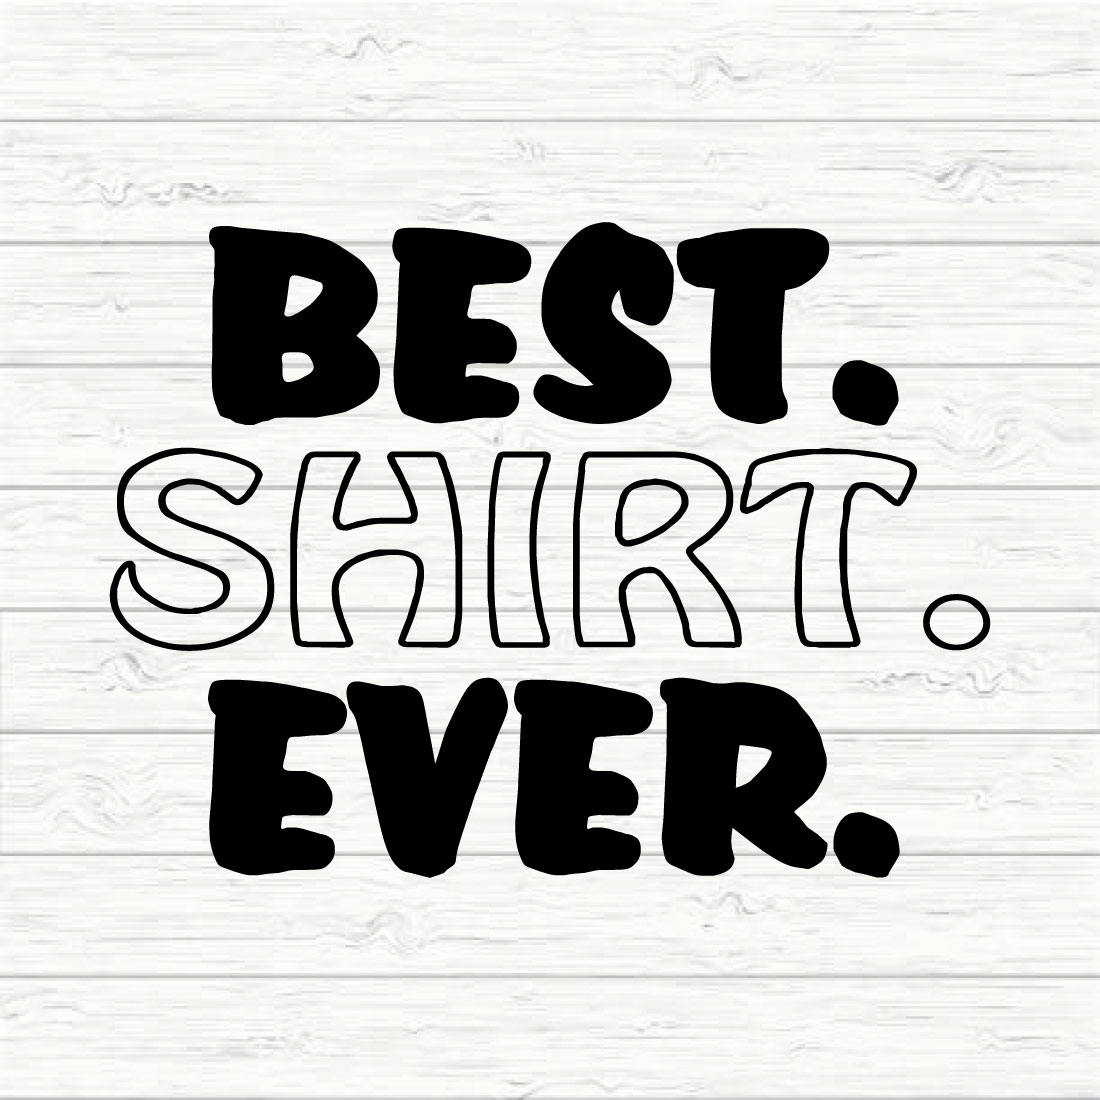 Best shirt ever preview image.